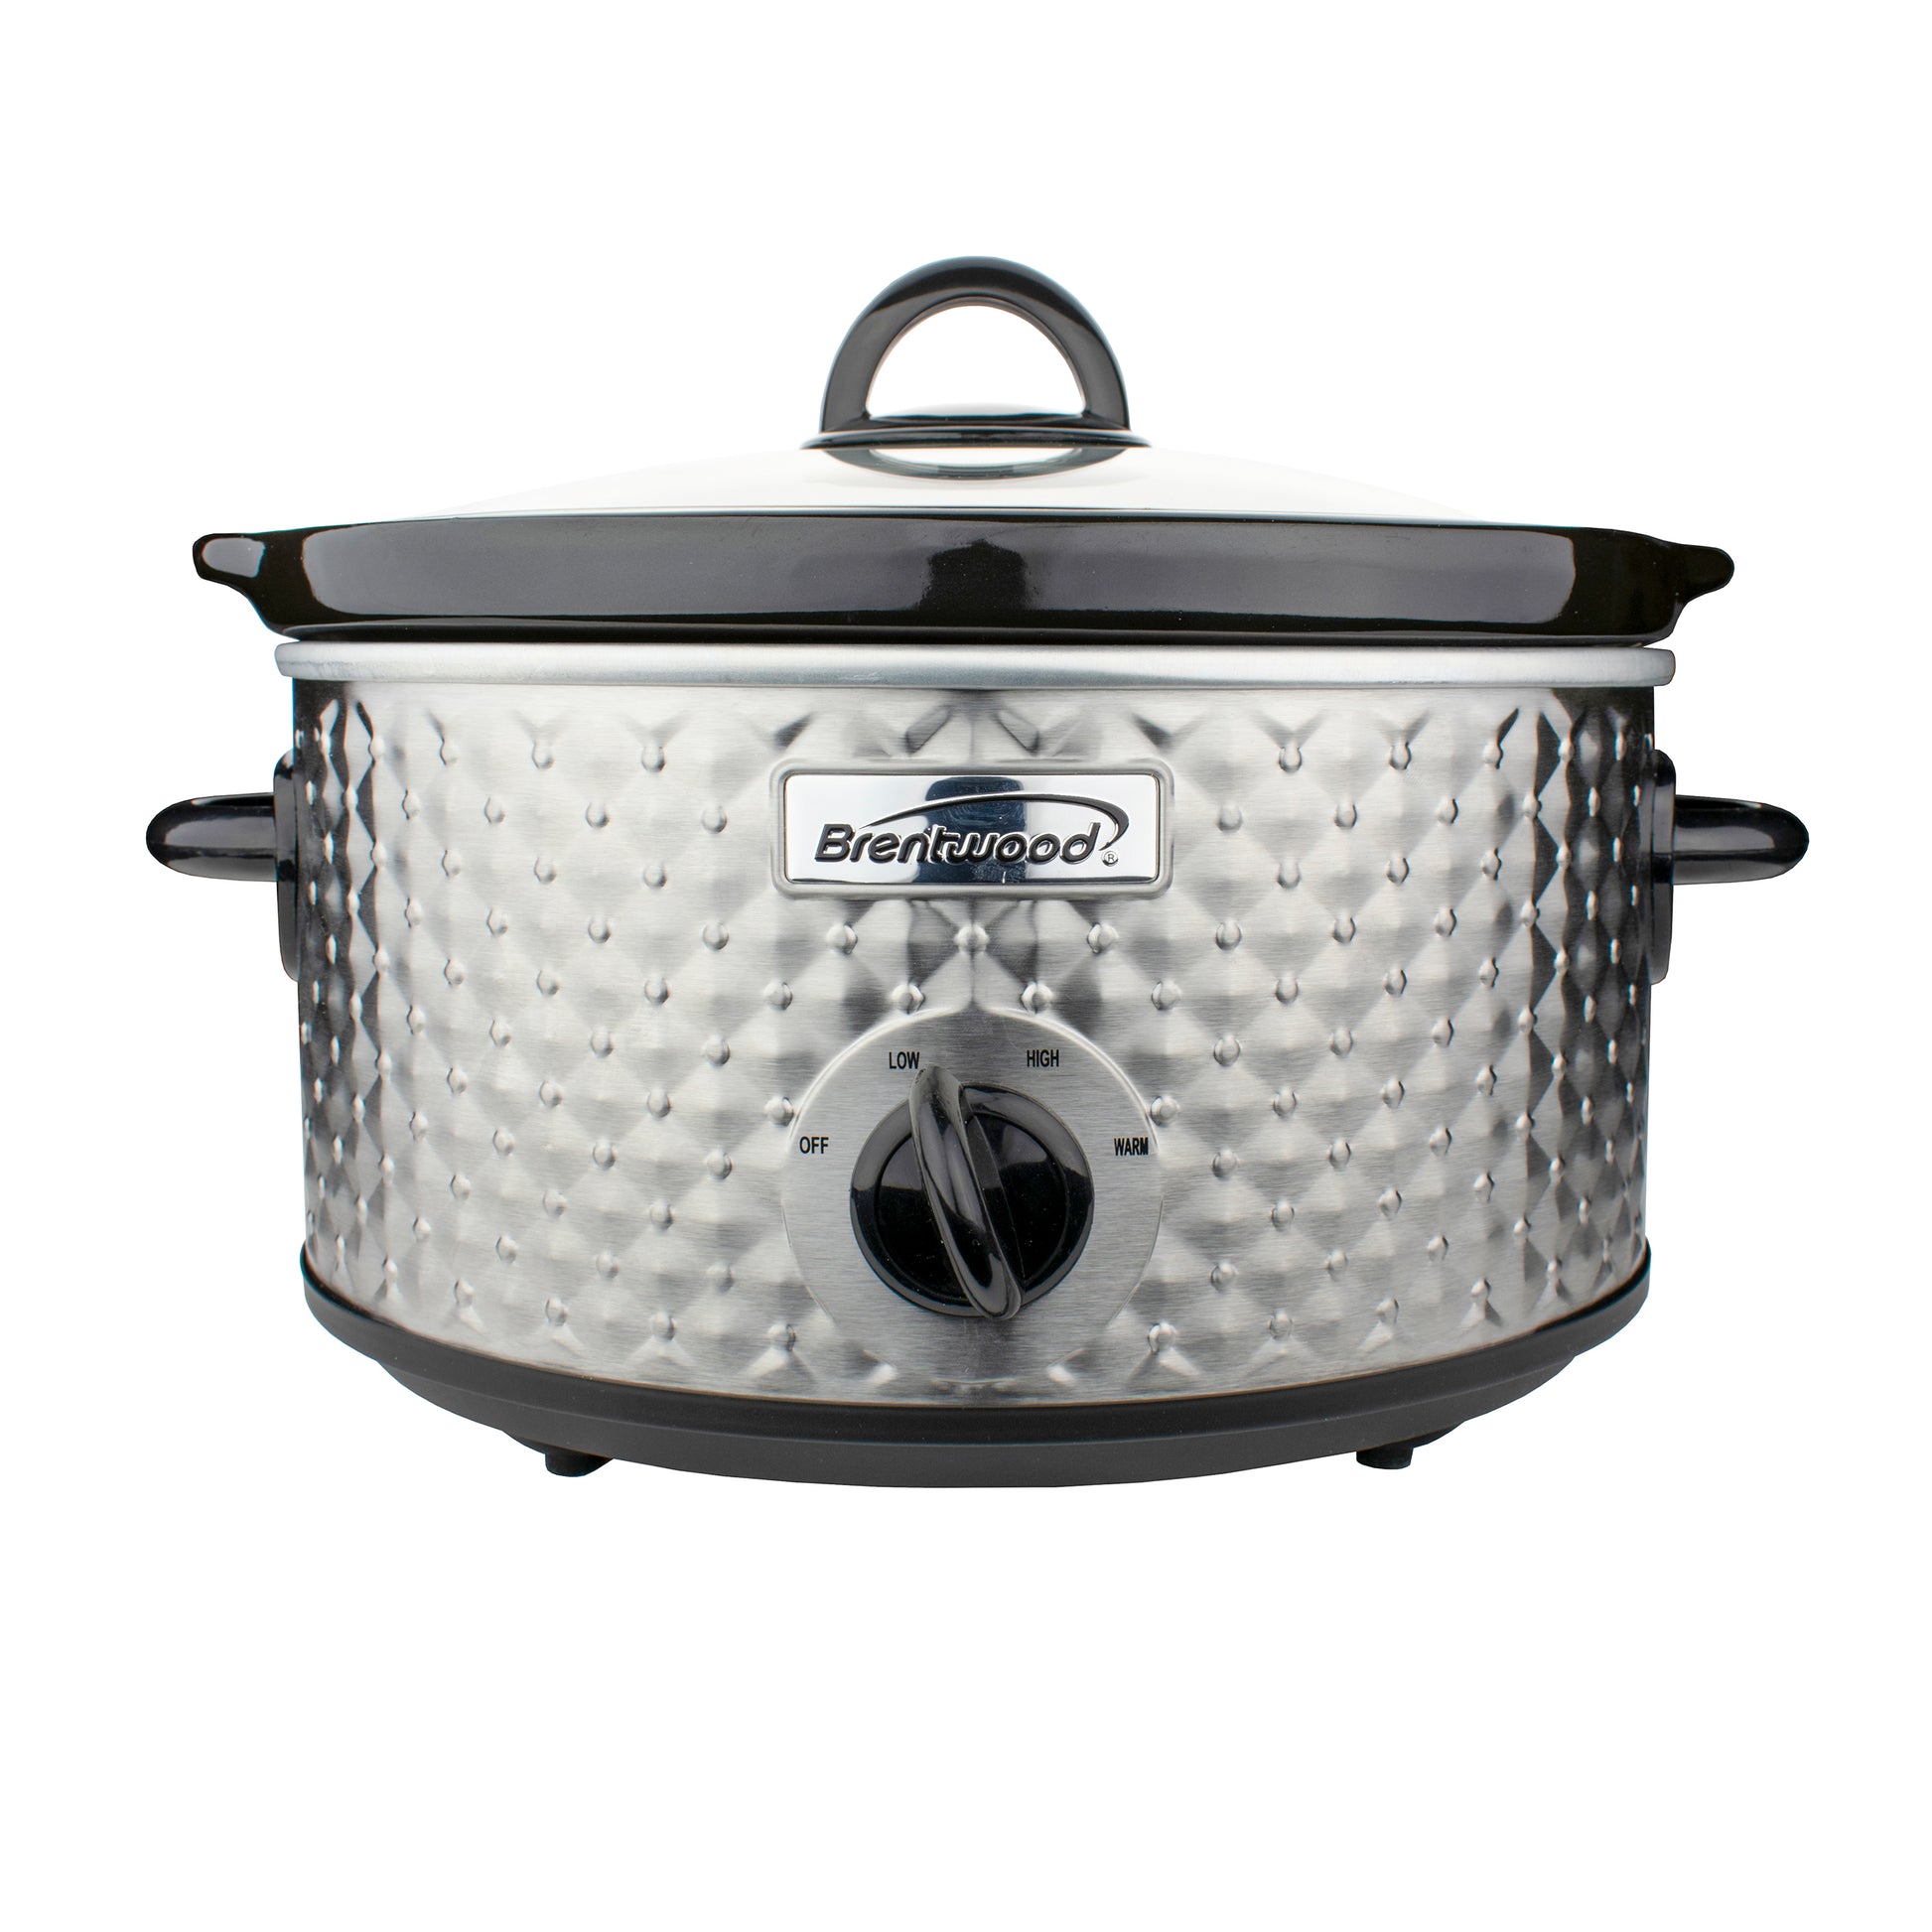 Brentwood Brentwood 3.5 Quart Diamond Pattern Slow Cooker in Stainless Steel